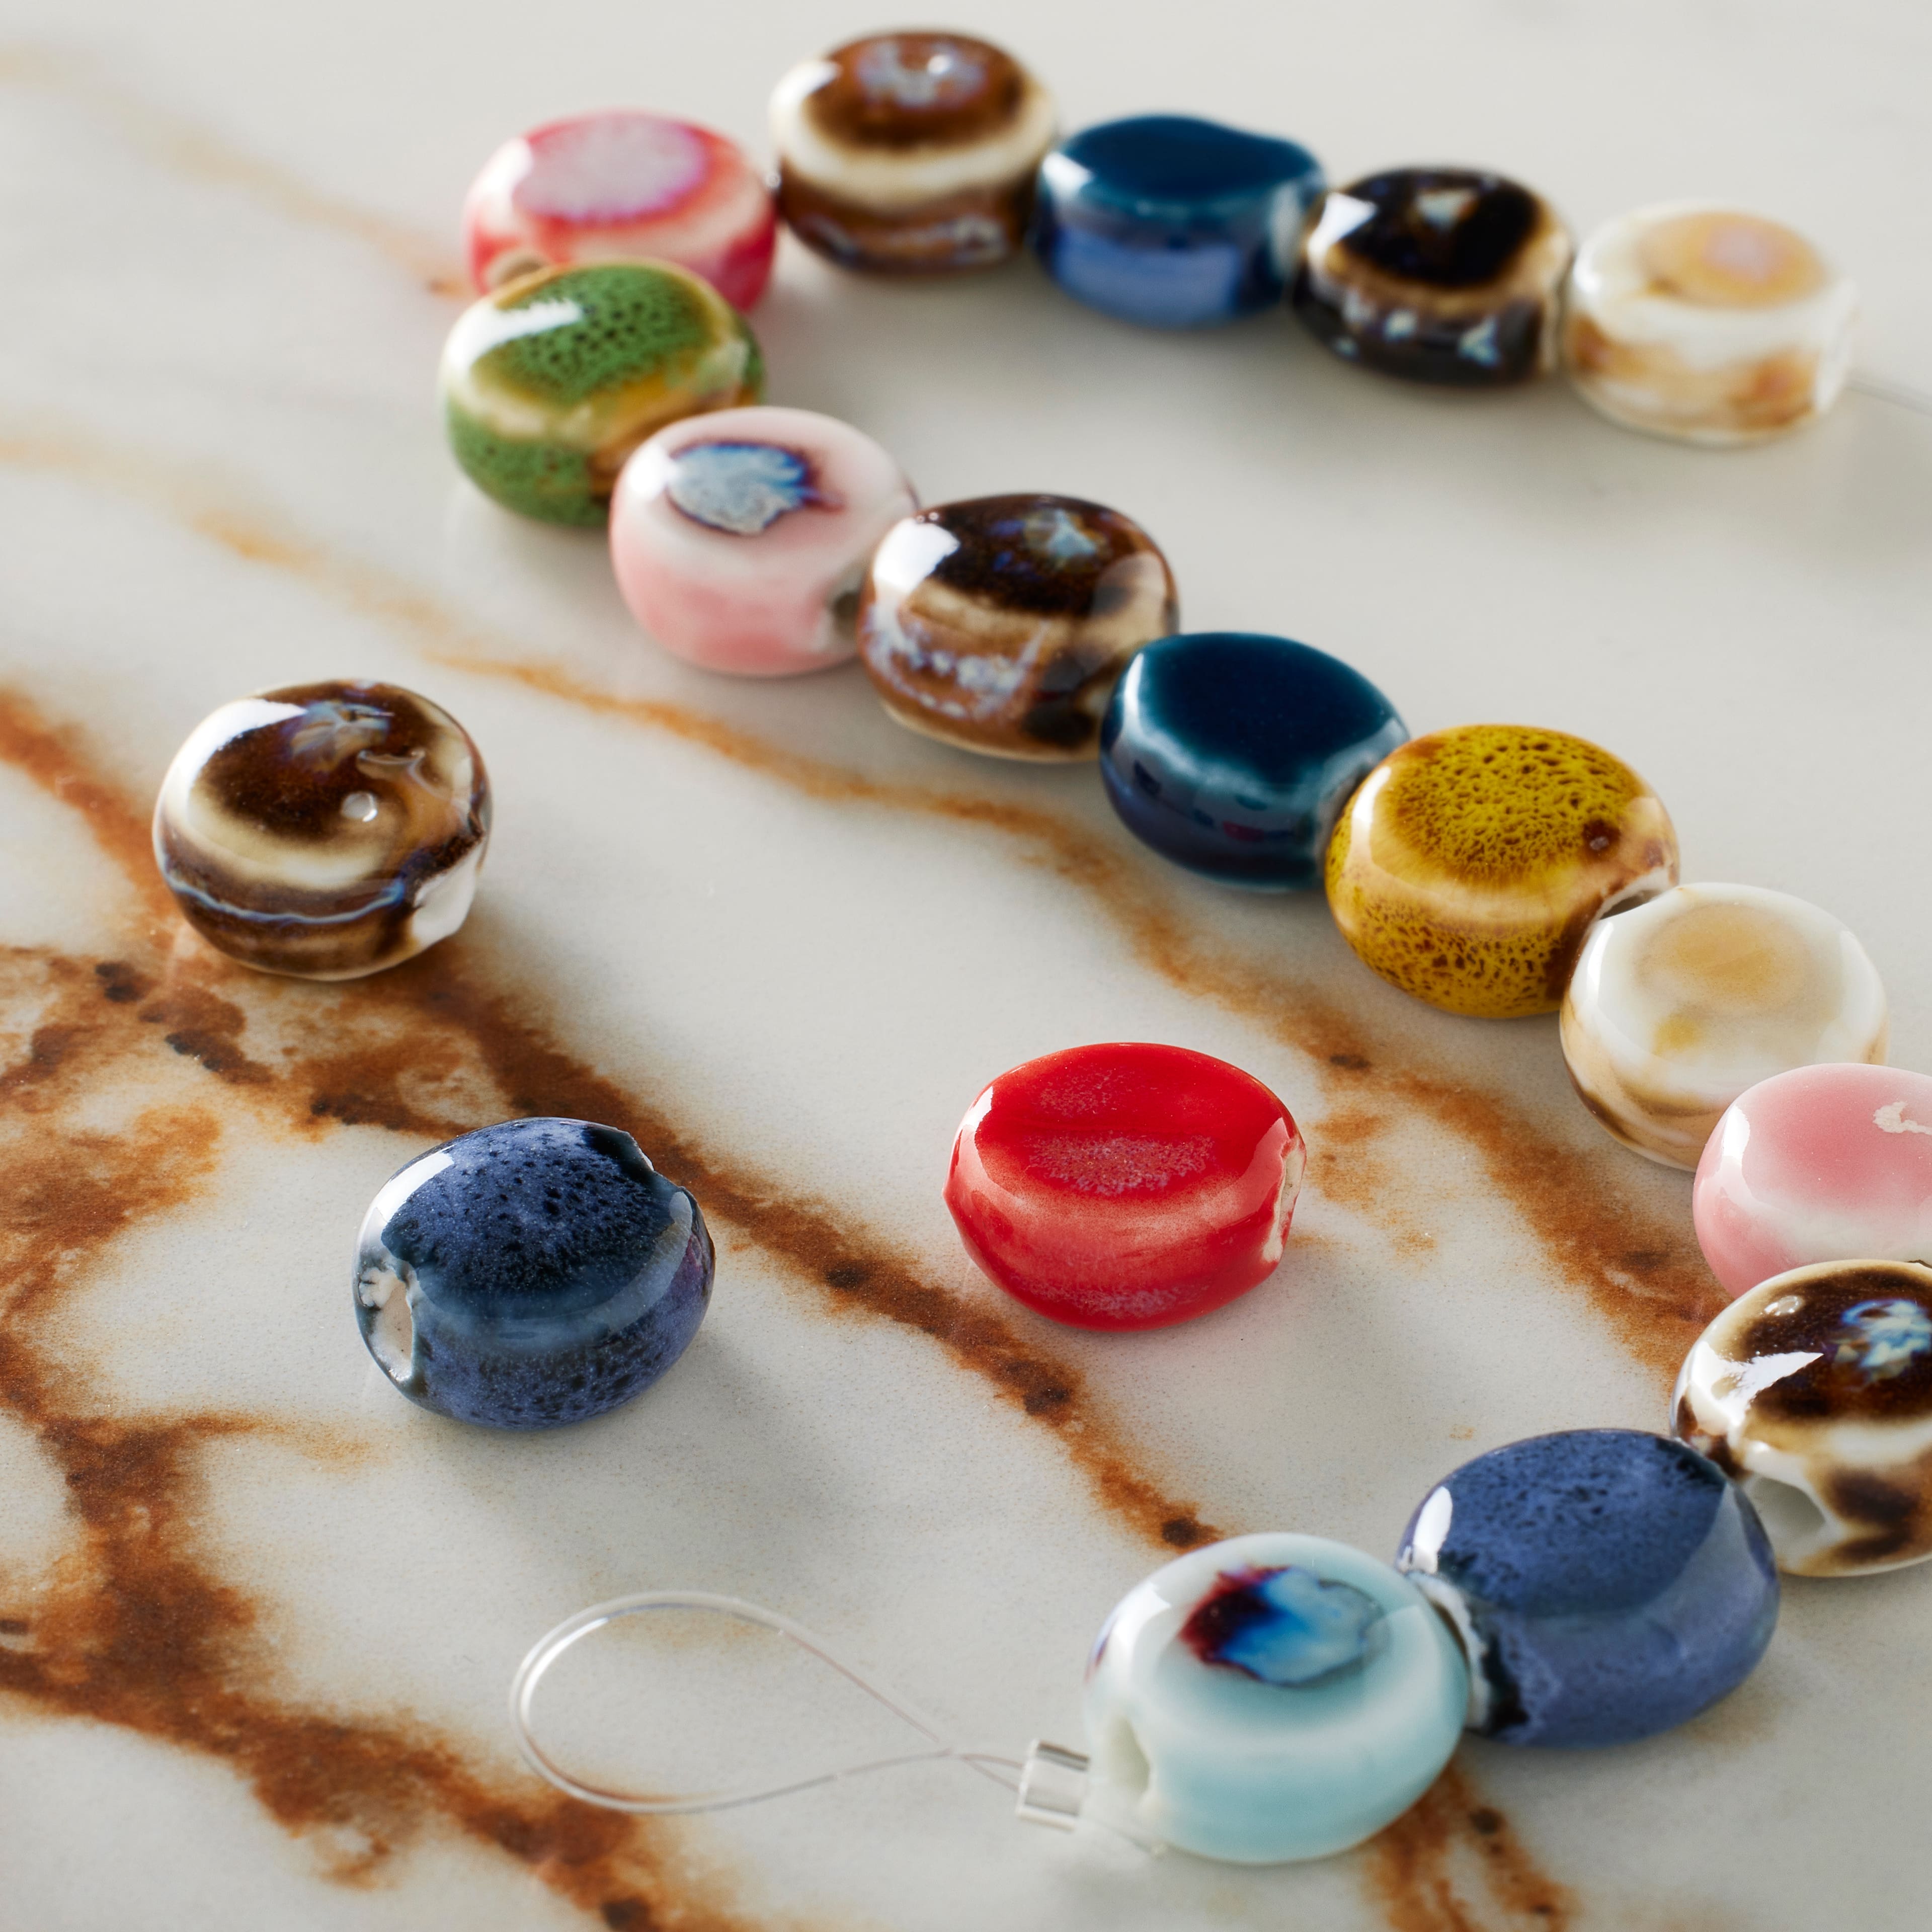 Multicolor Ceramic Coin Beads, 10.5mm by Bead Landing&#x2122;